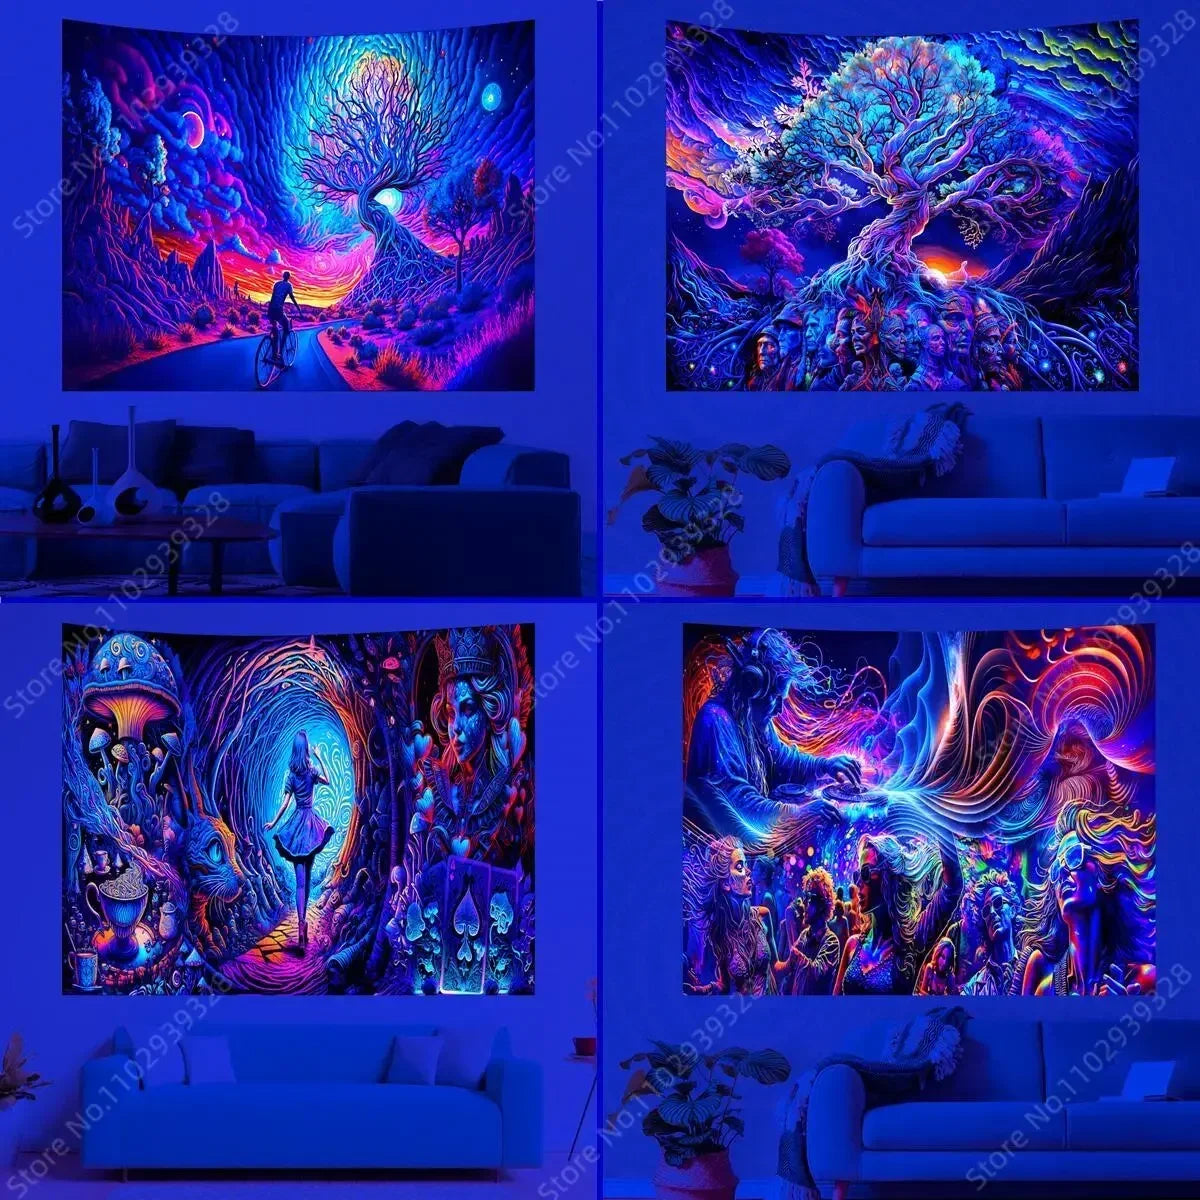 Psychedelic Figure UV Reactive Tapestry Trippy Colorful Landscape Wall Hanging Neon Tapestries for Room Decor Party Decor